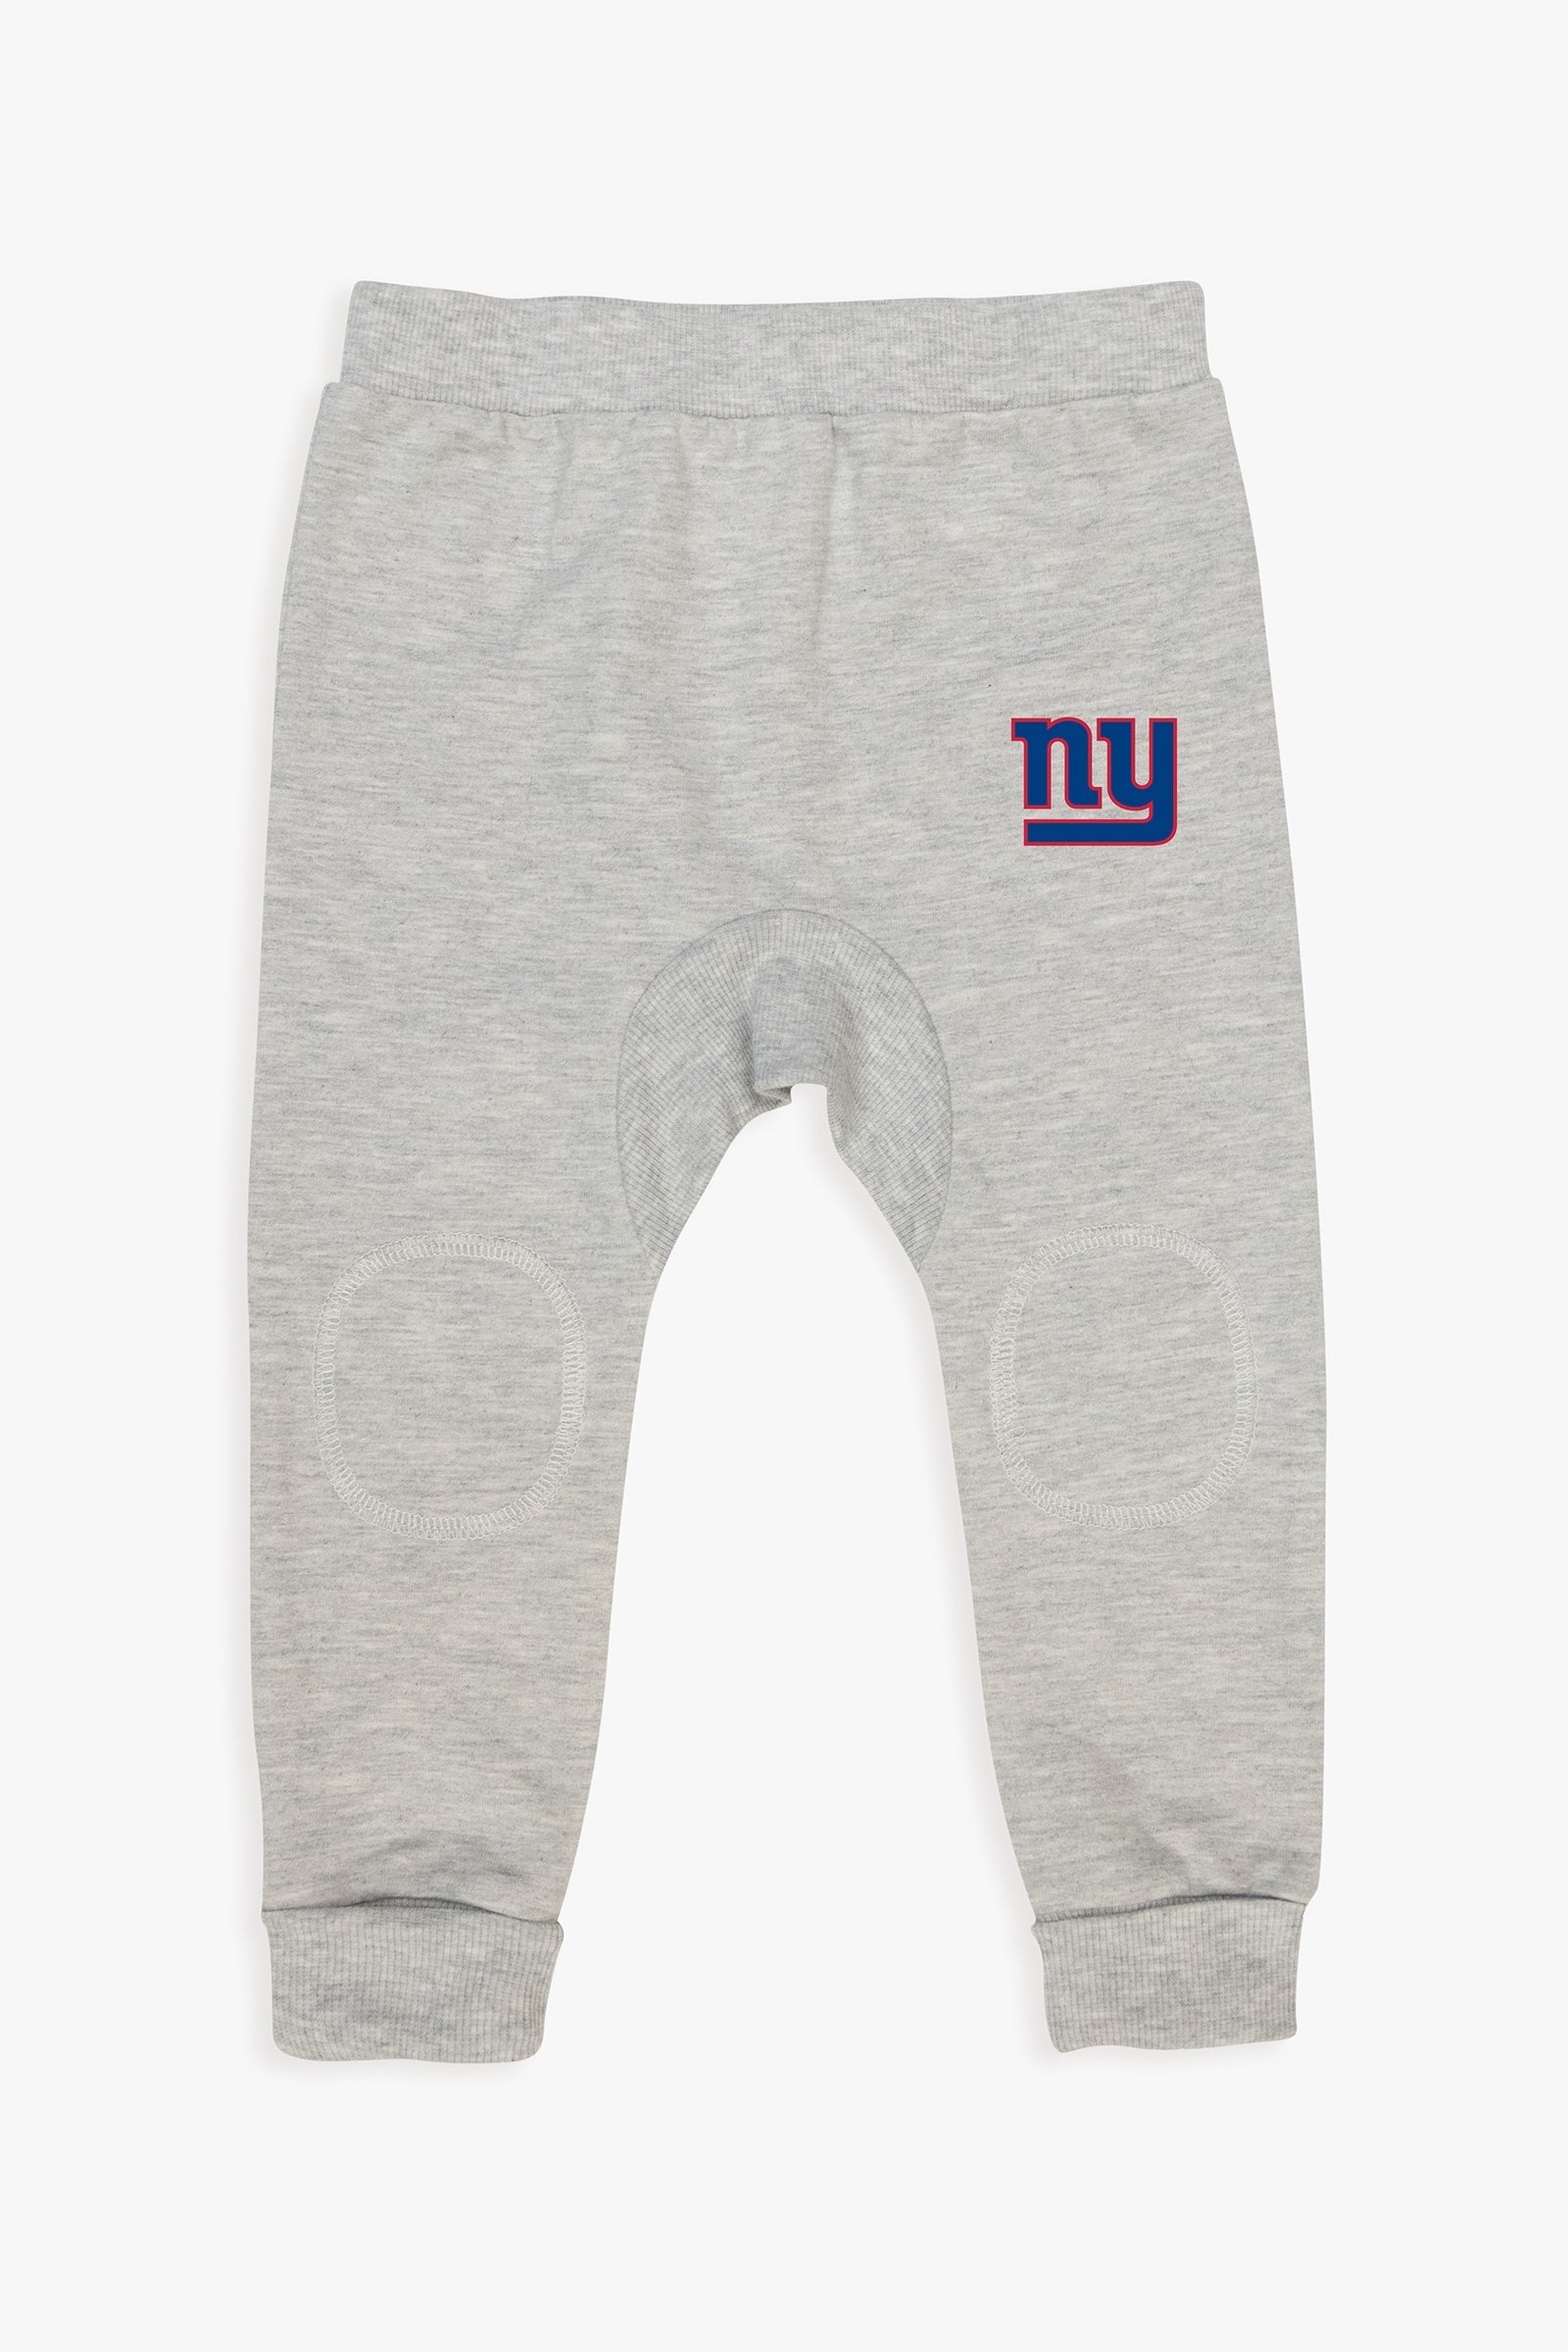 NFL Toddler Grey French Terry Pants